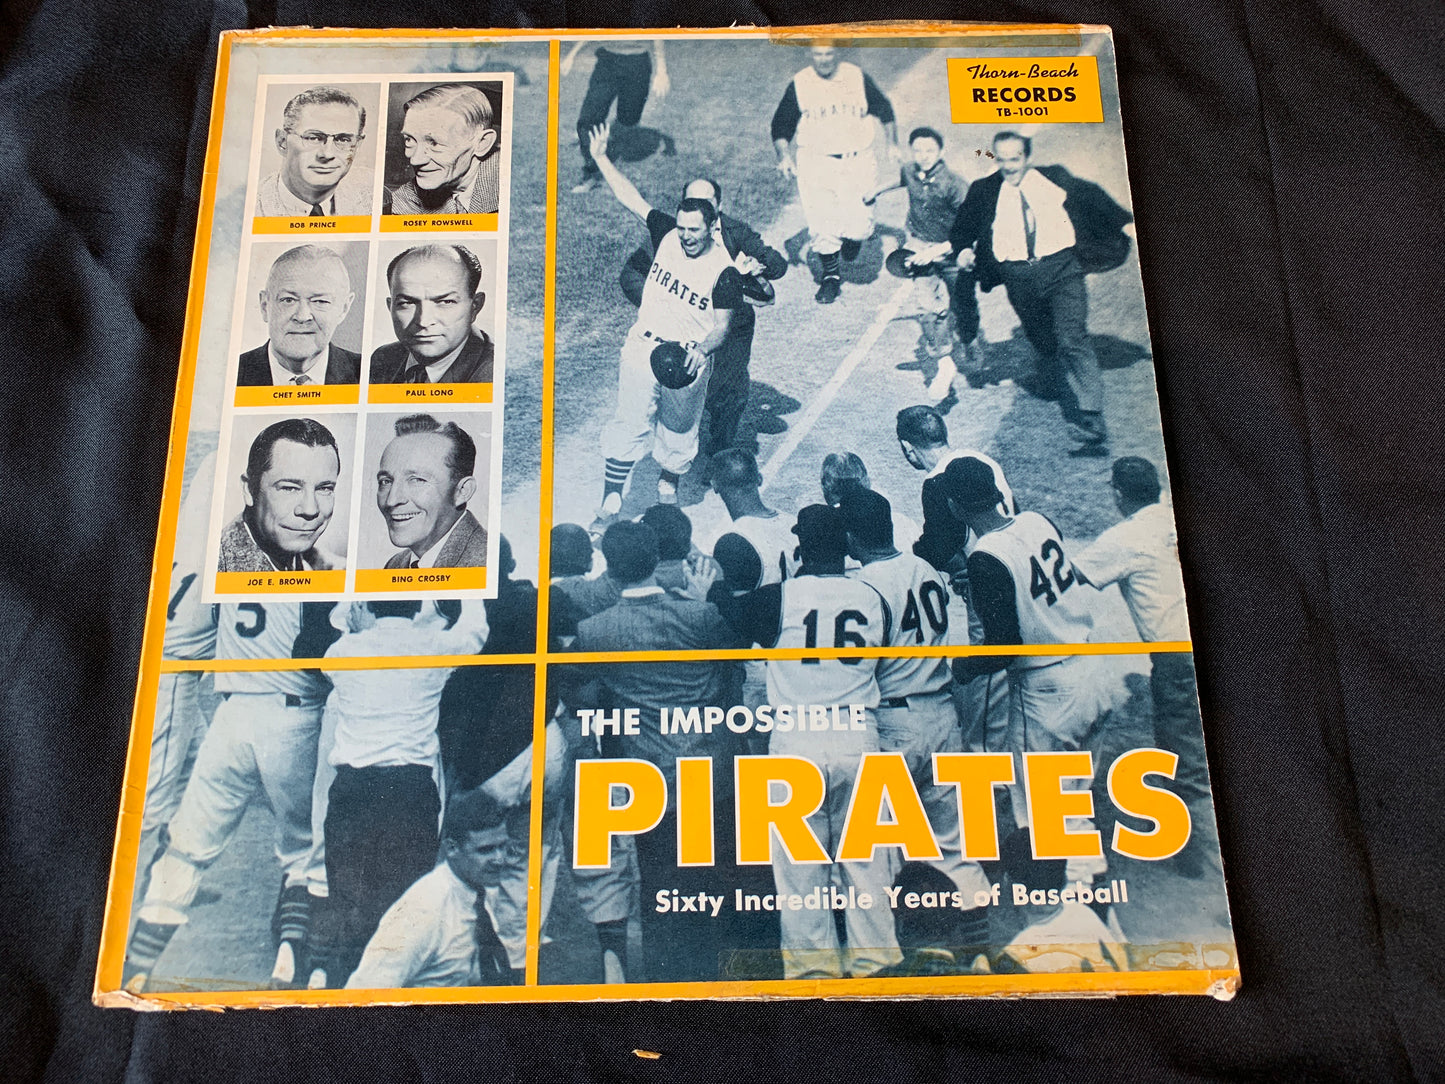 The Impossible Pittsburgh Pirates, 60 Years in Baseball Vinyl Album, vintage.